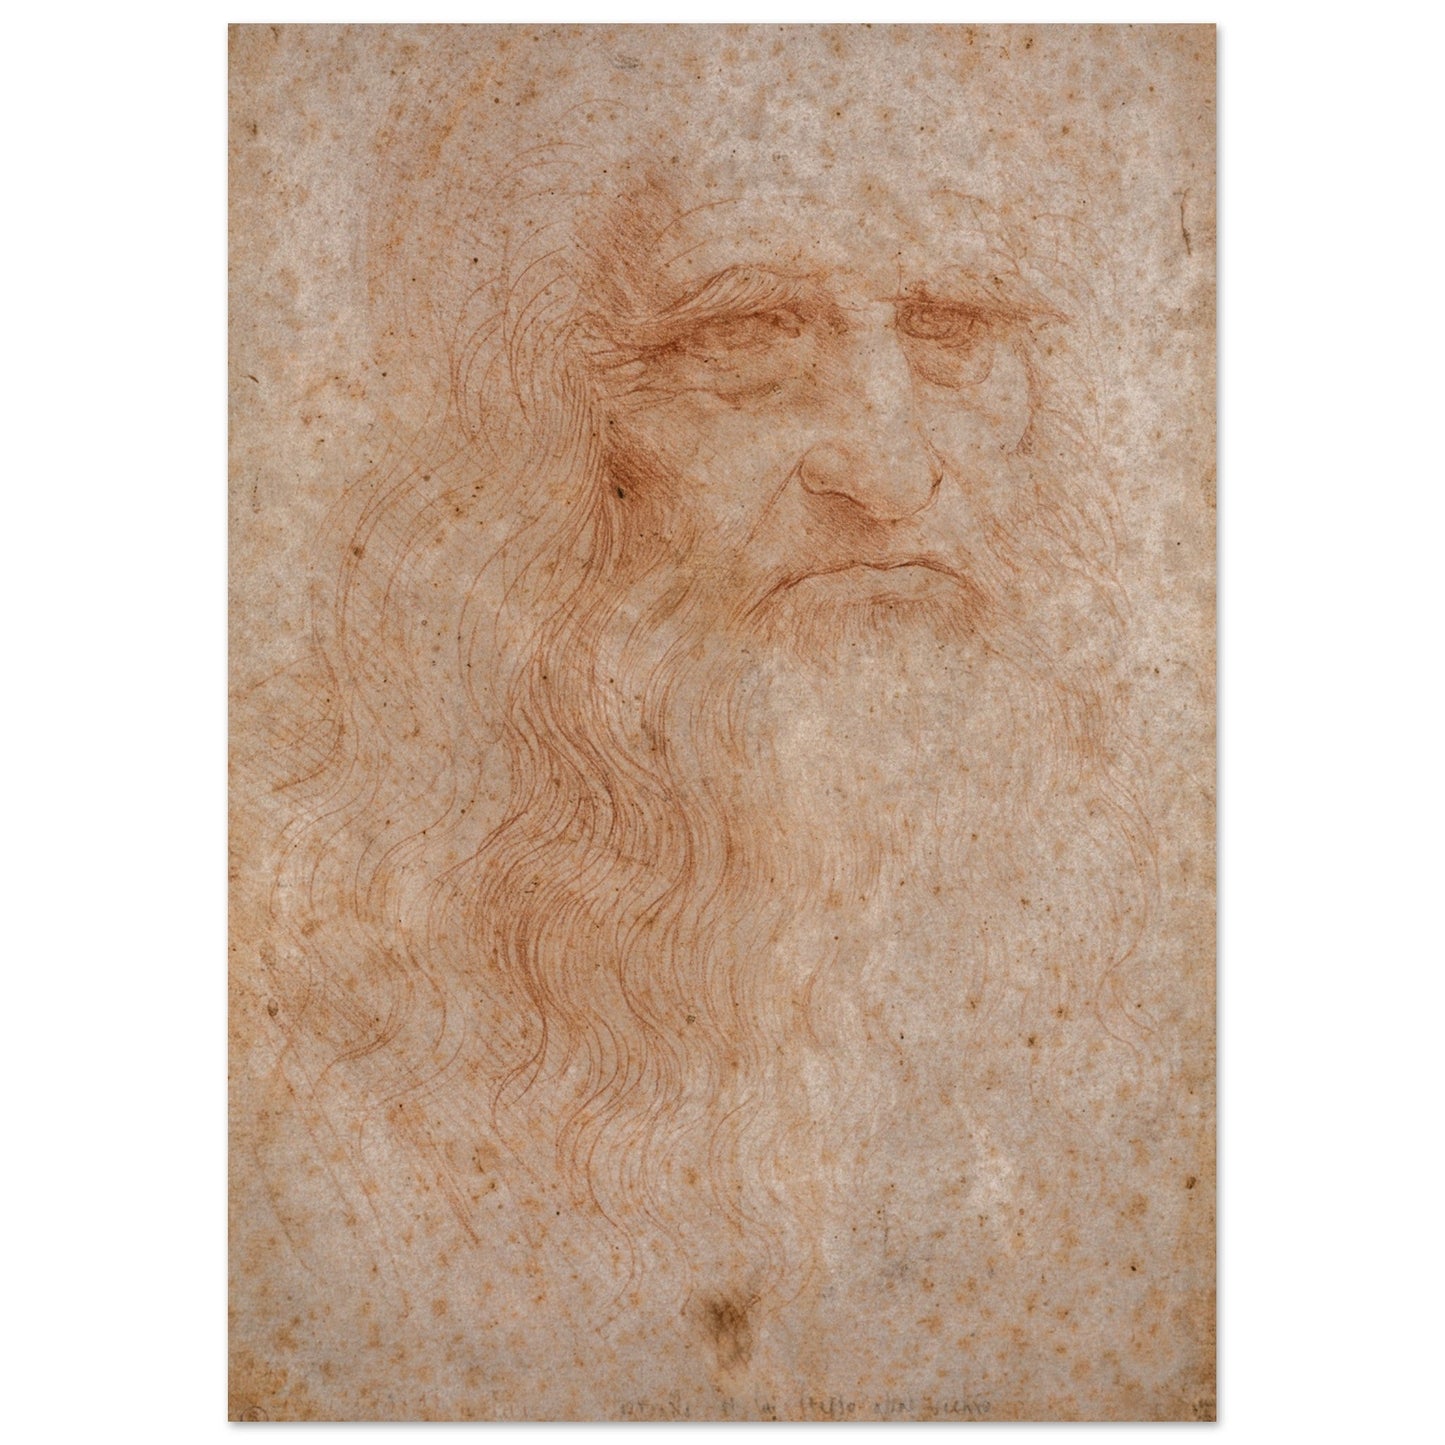 High Quality Posters of Self-portrait in Red Chalk for Room.